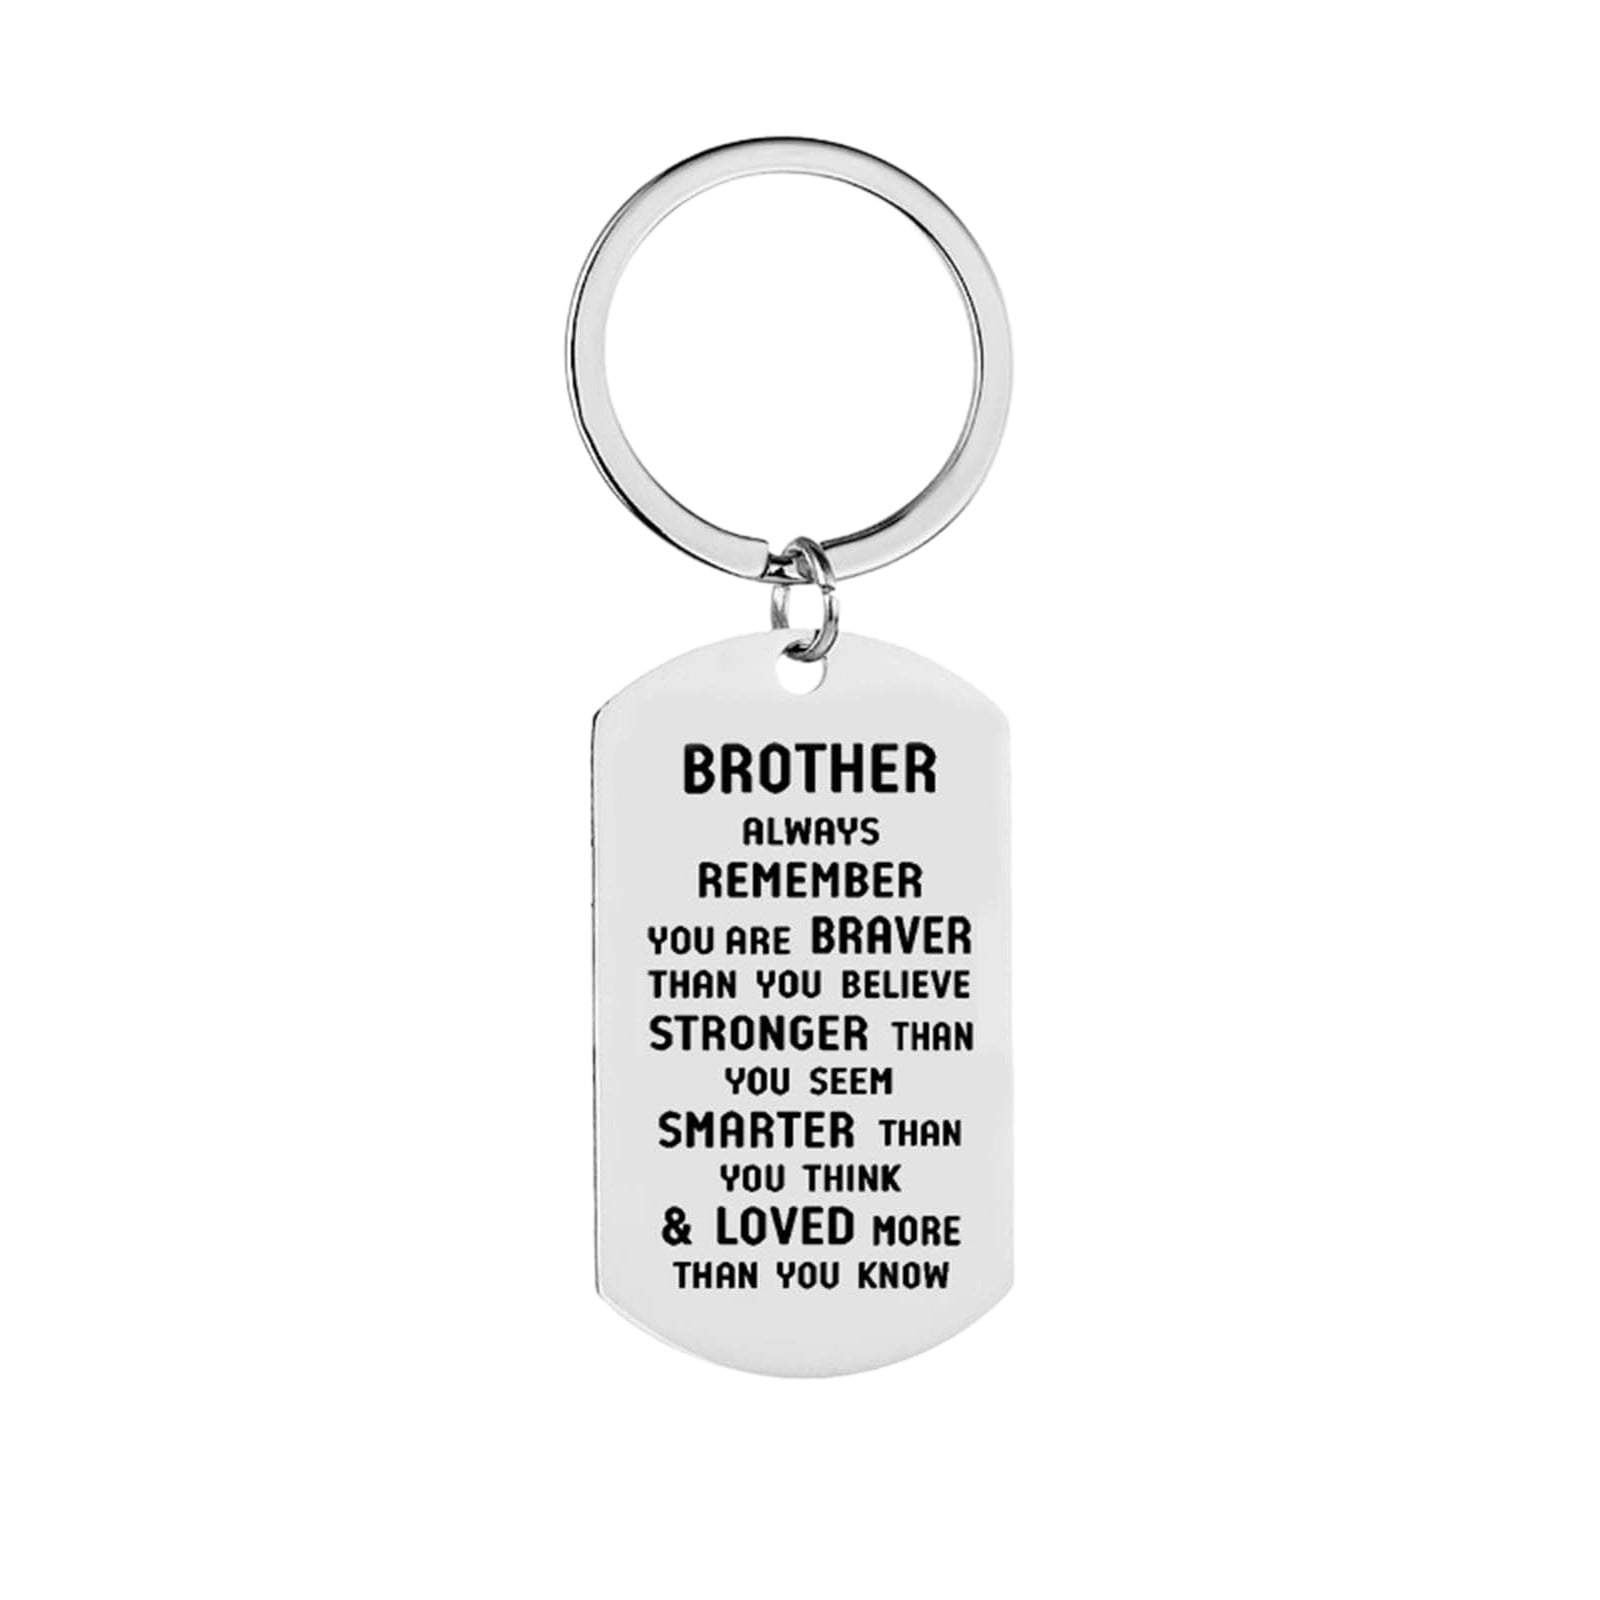 Remember you are braver enamel keyringproud of you gifts from mumsmall| 